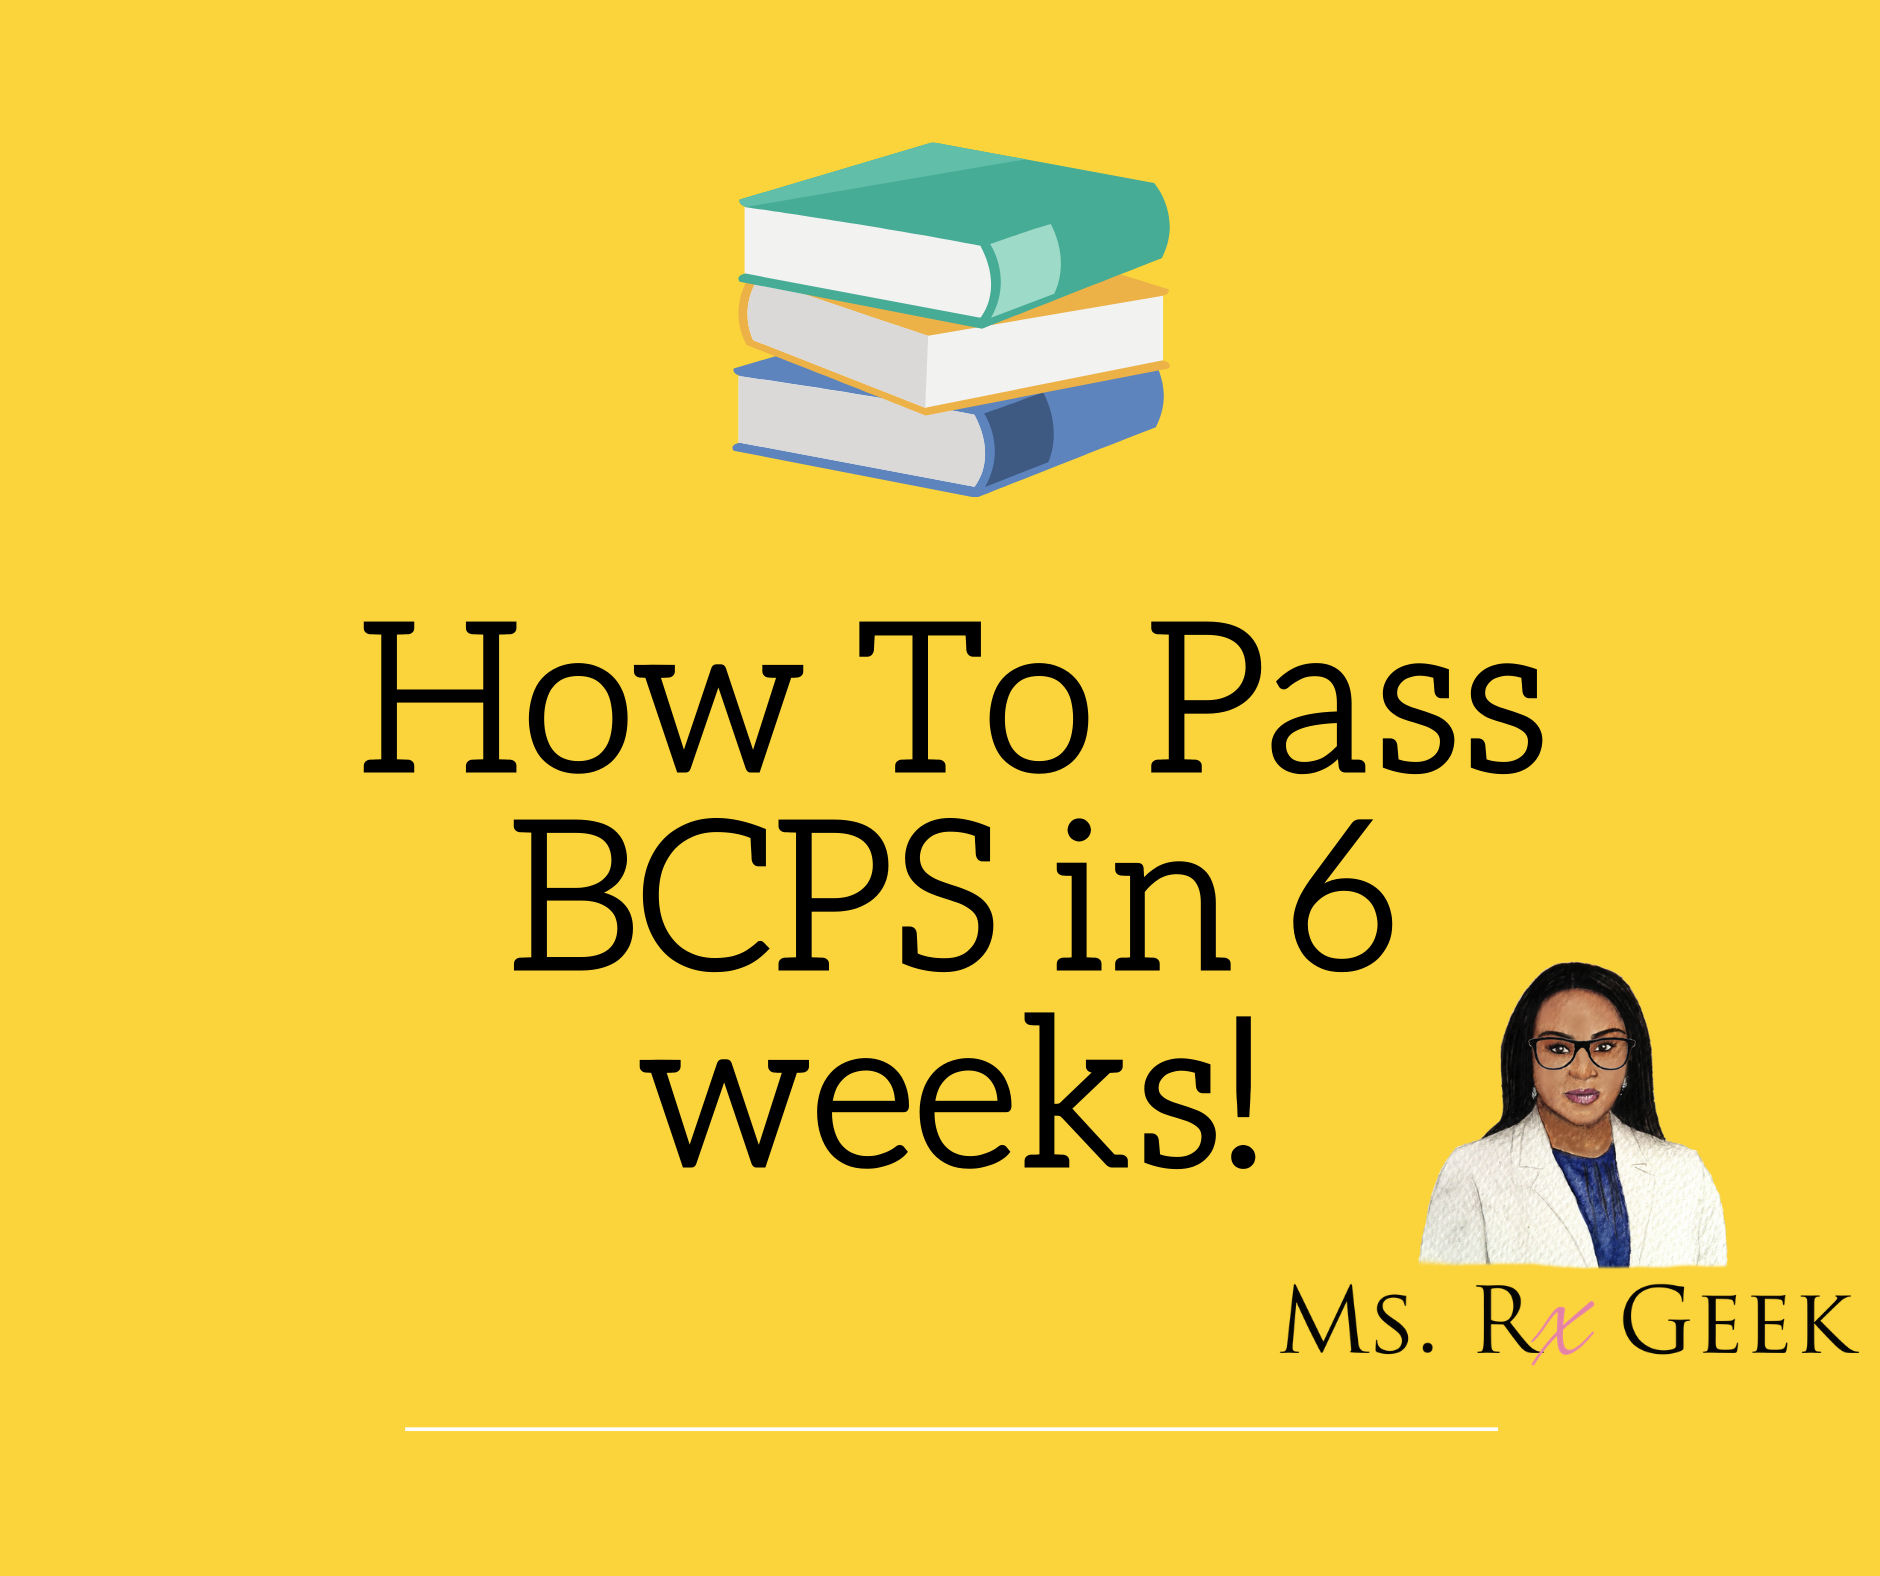 How to Pass and Study for BCPS (Pharmacotherapy Board Exam) in 6 Weeks